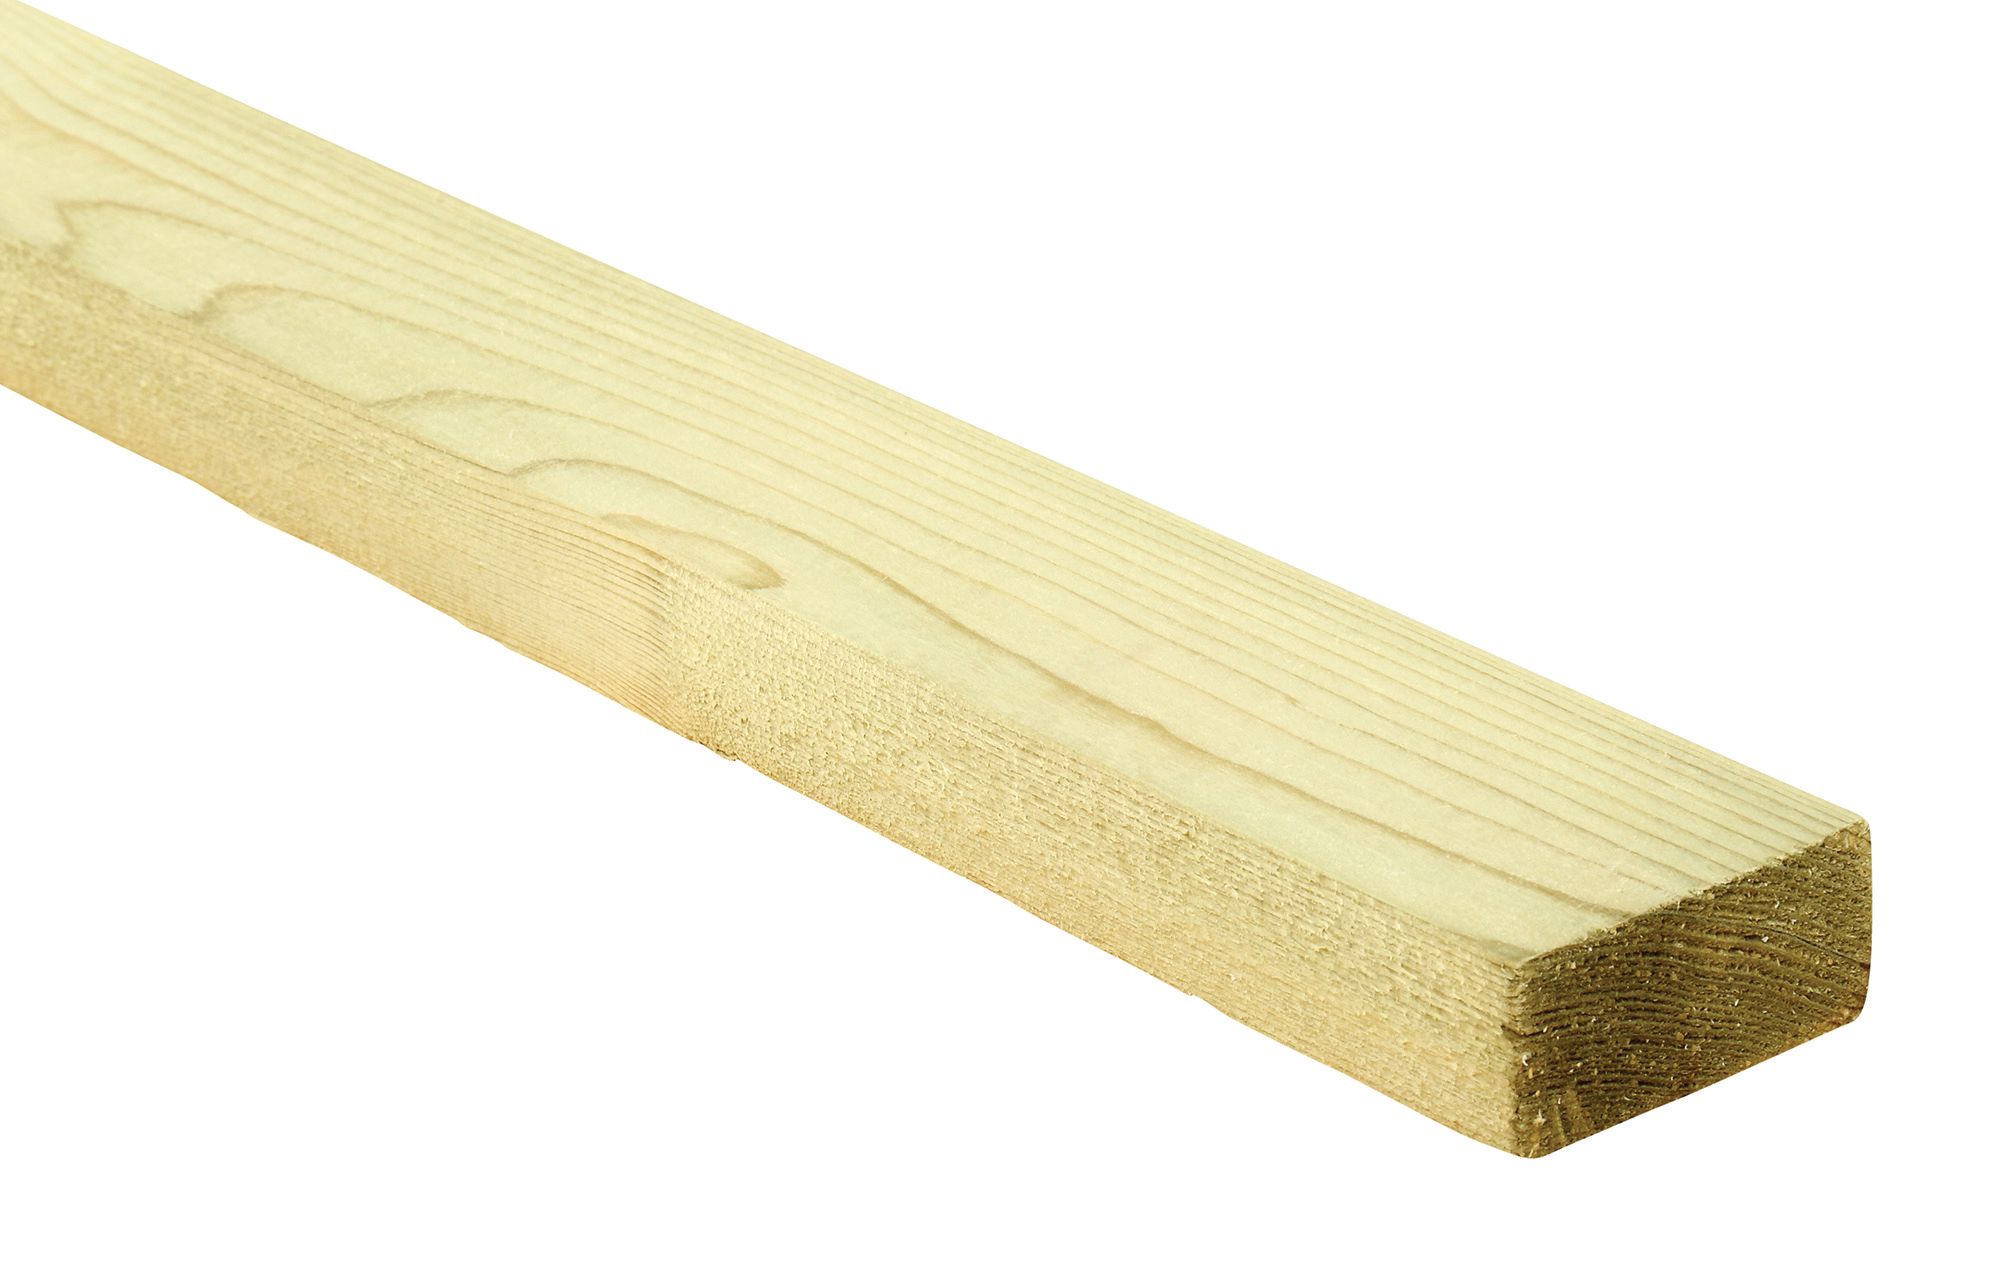 Image of Wickes Treated Sawn Timber - 22mm x 47mm x 1800mm